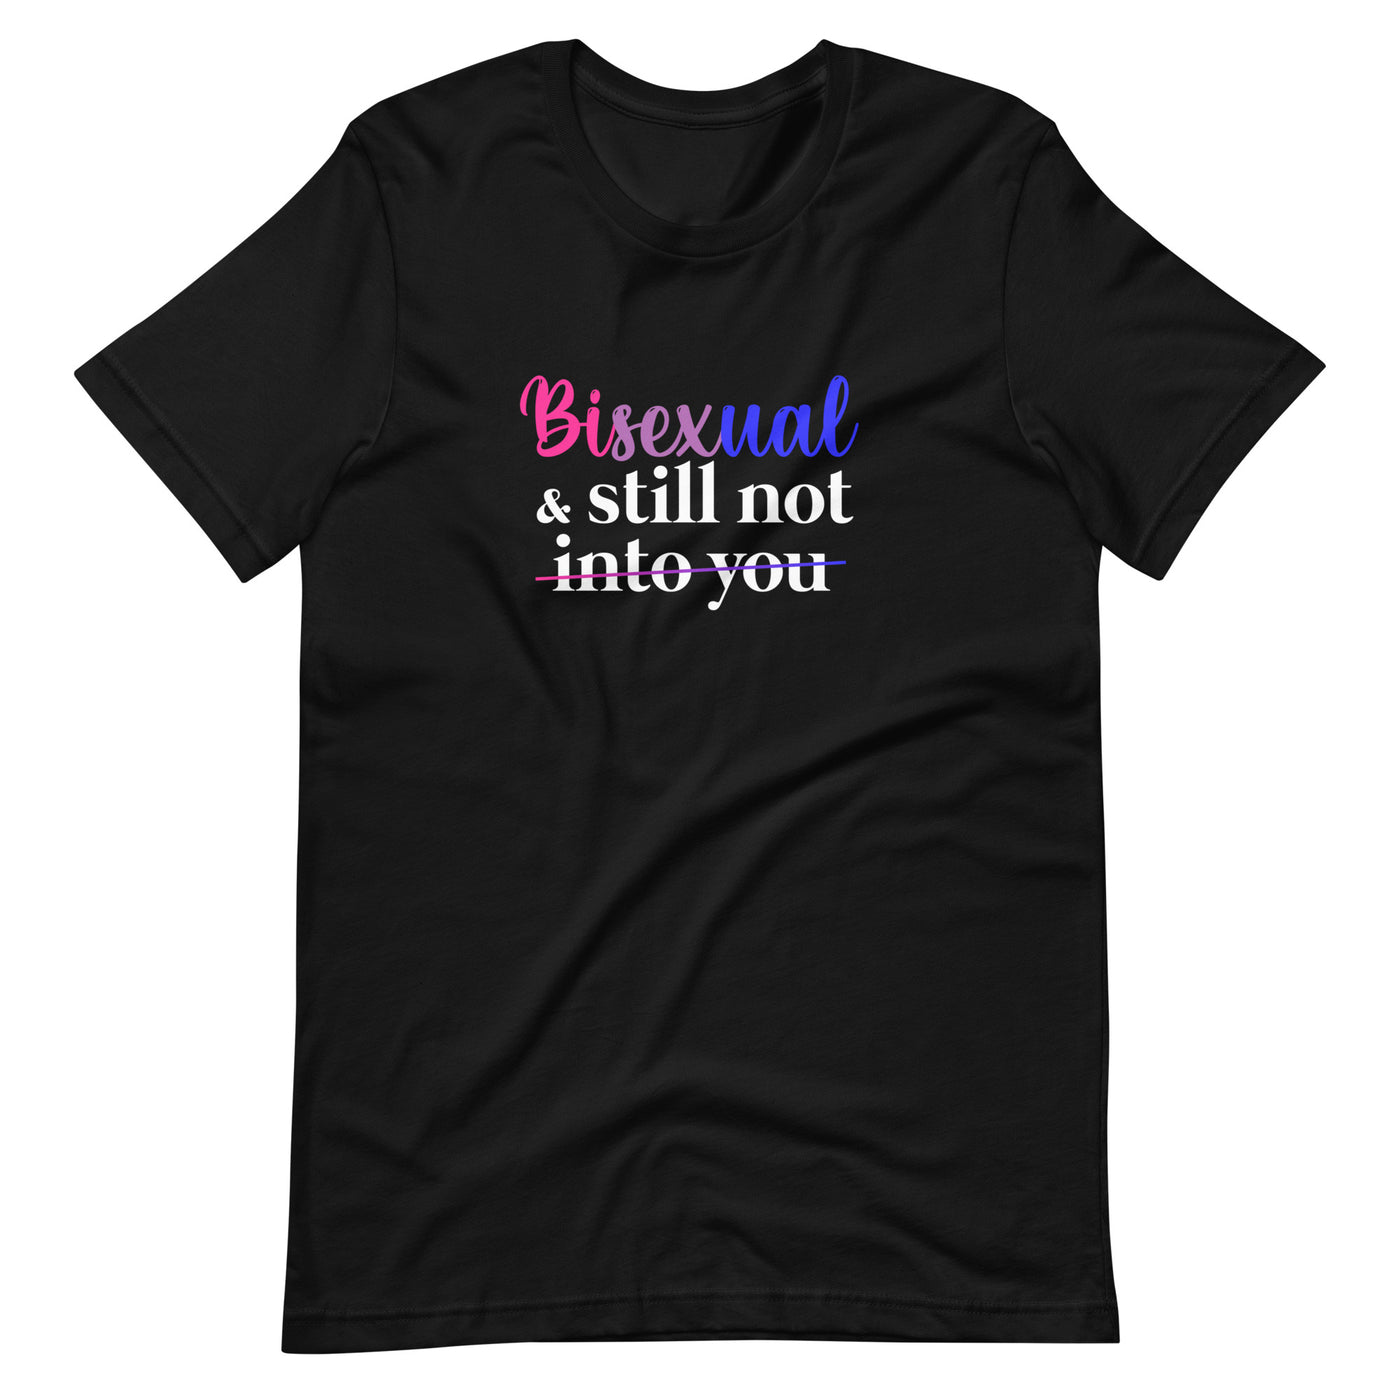 Pride Clothes - Not-So-Gentle Bisexual & Still Not into You TShirt - Black